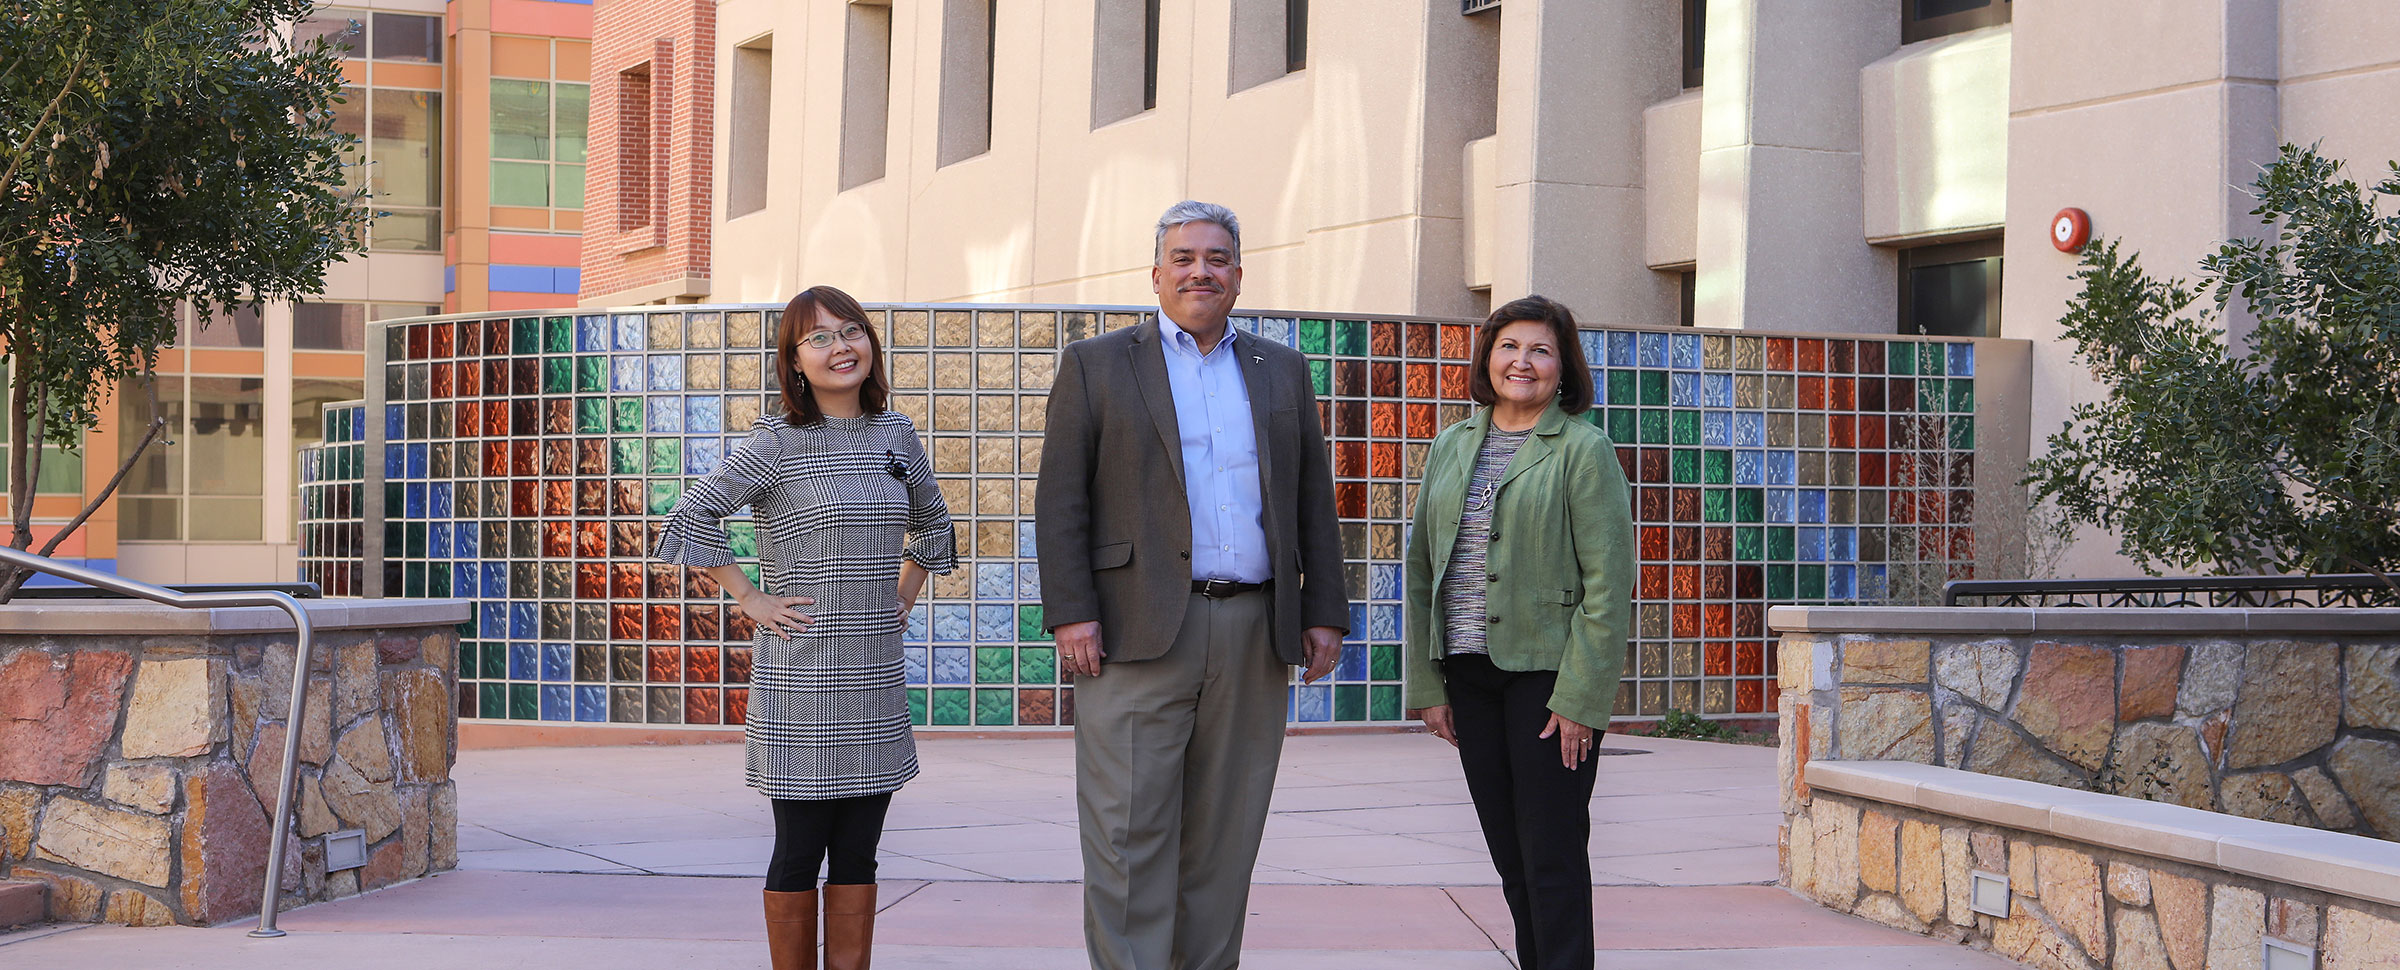 UTEP Receives $1M to Develop System to Increase Number of Students Who Pursue Graduate Engineering Studies 